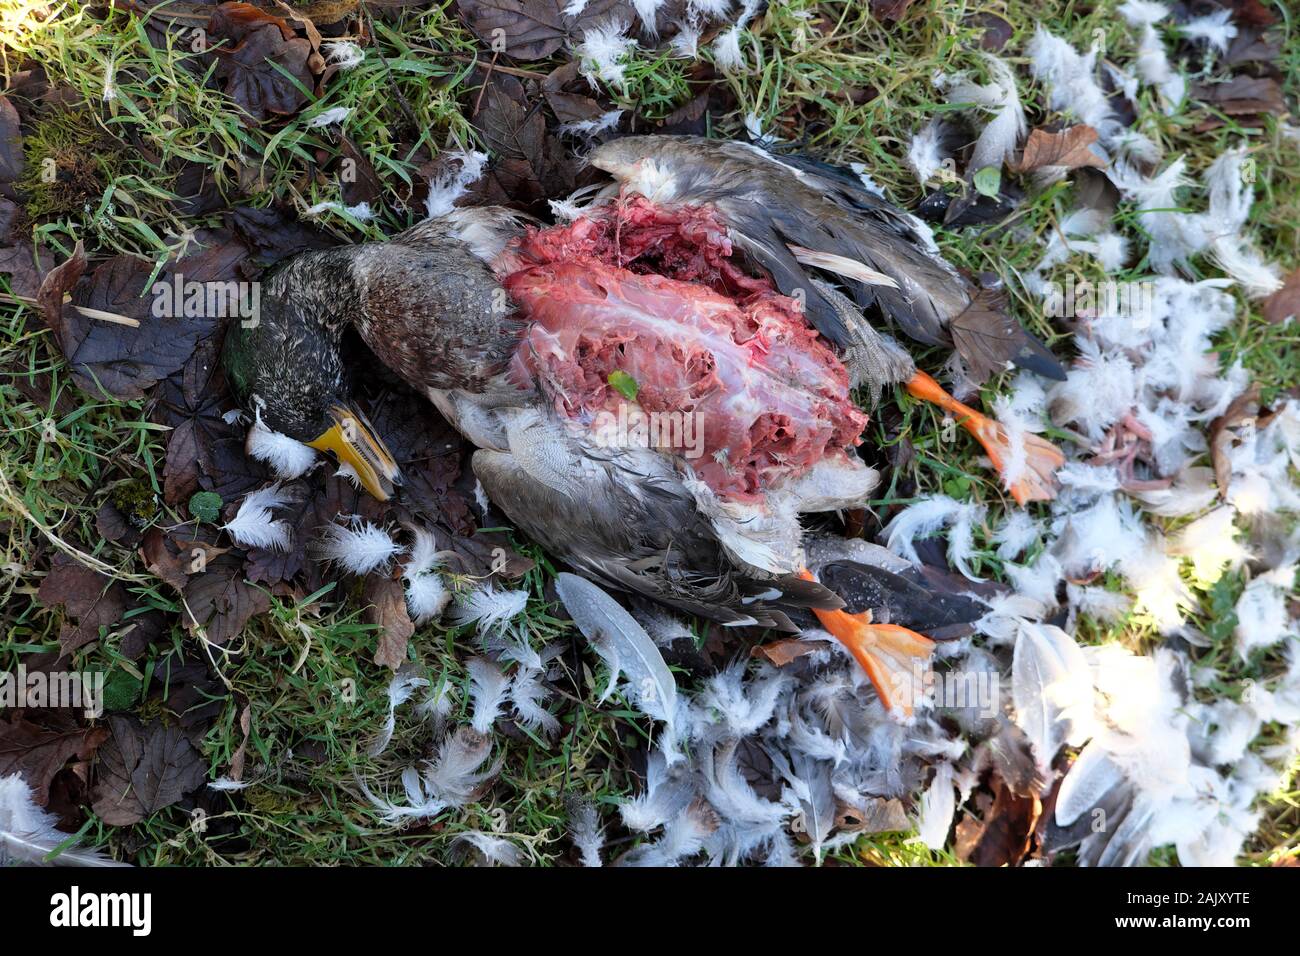 Duck lying dead in a ditch most likely ravaged by a Goshawk on a rural smallholding in Carmarthenshire West Wales, Great Britain UK   KATHY DEWITT Stock Photo